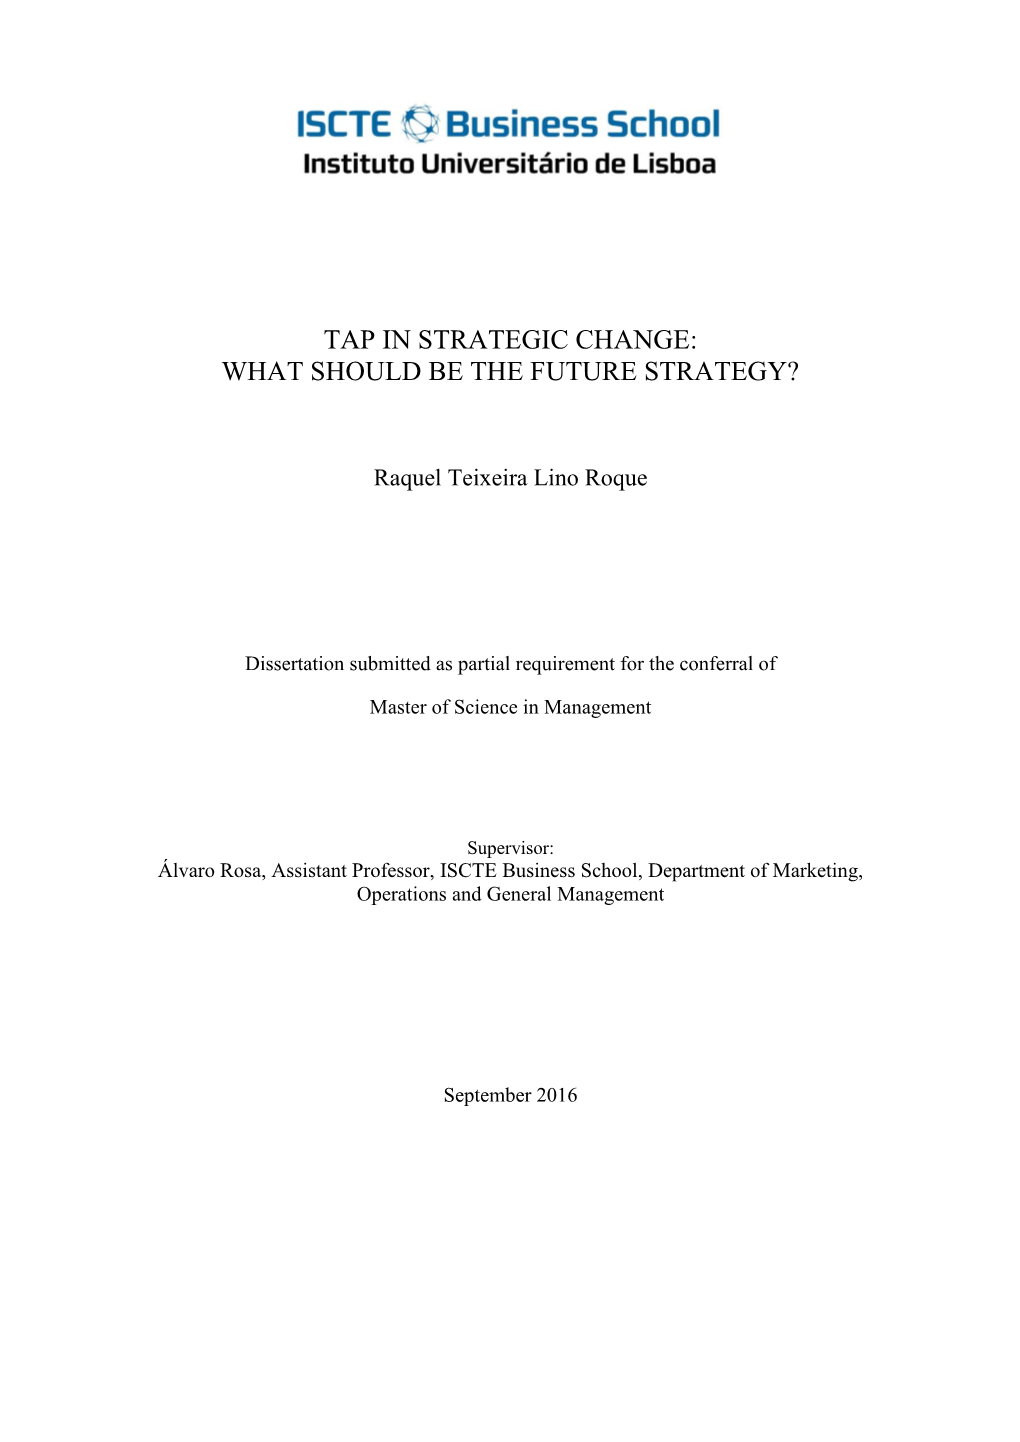 Tap in Strategic Change: What Should Be the Future Strategy?